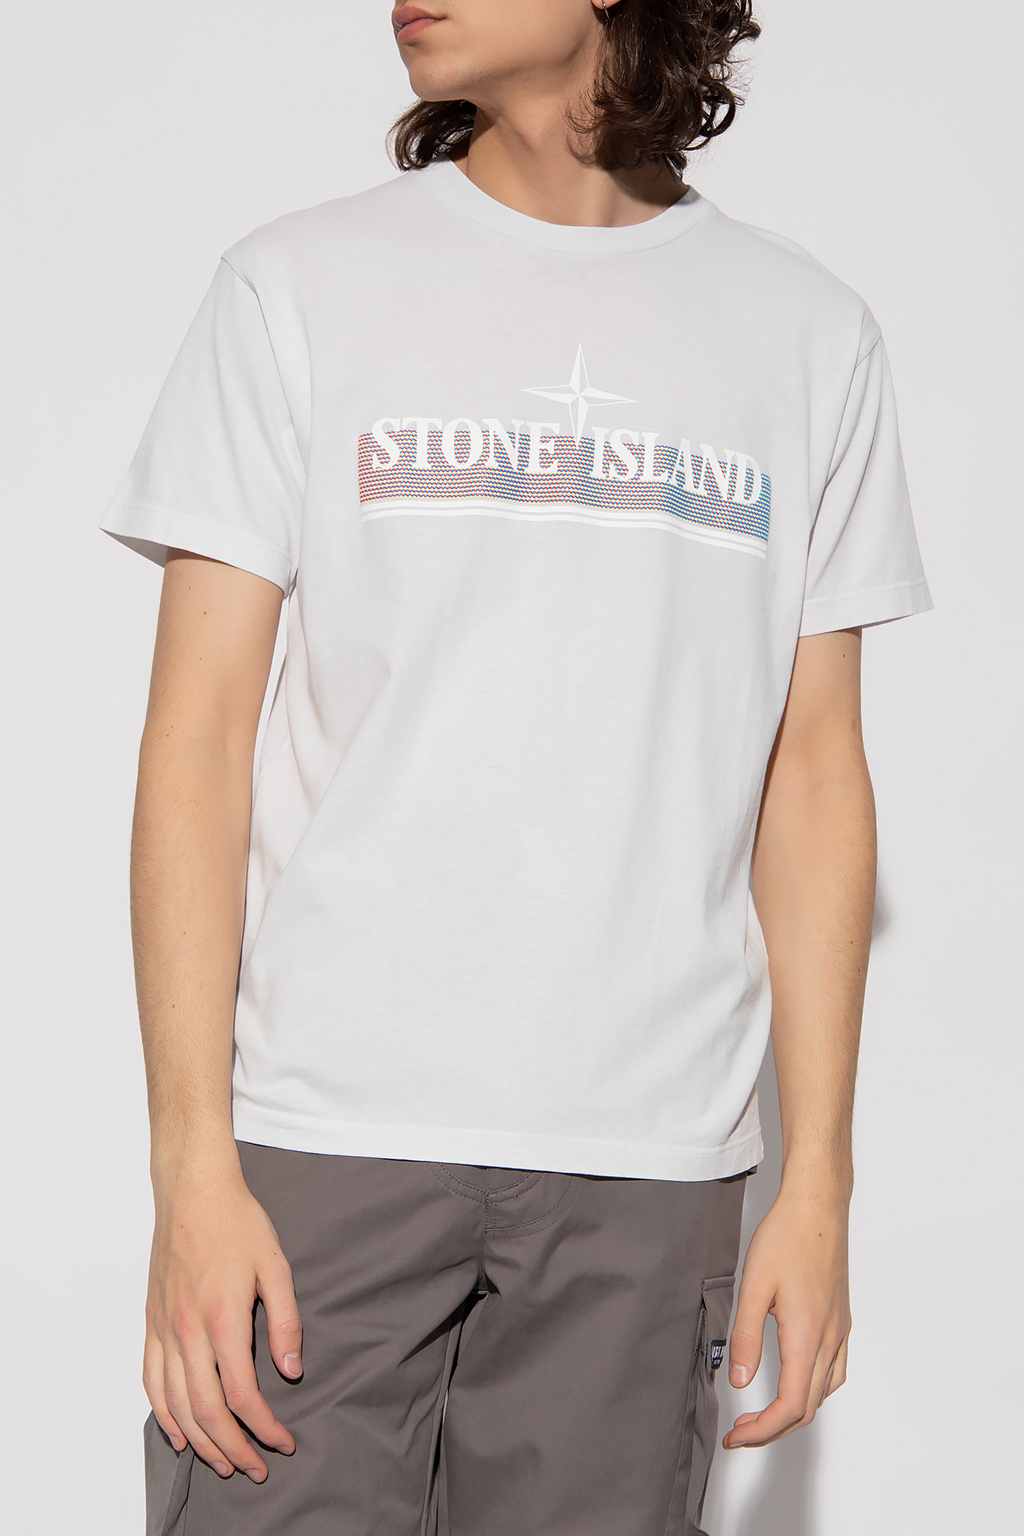 Stone Island olive t textured shirt with logo jacquemus t textured shirt anthracite